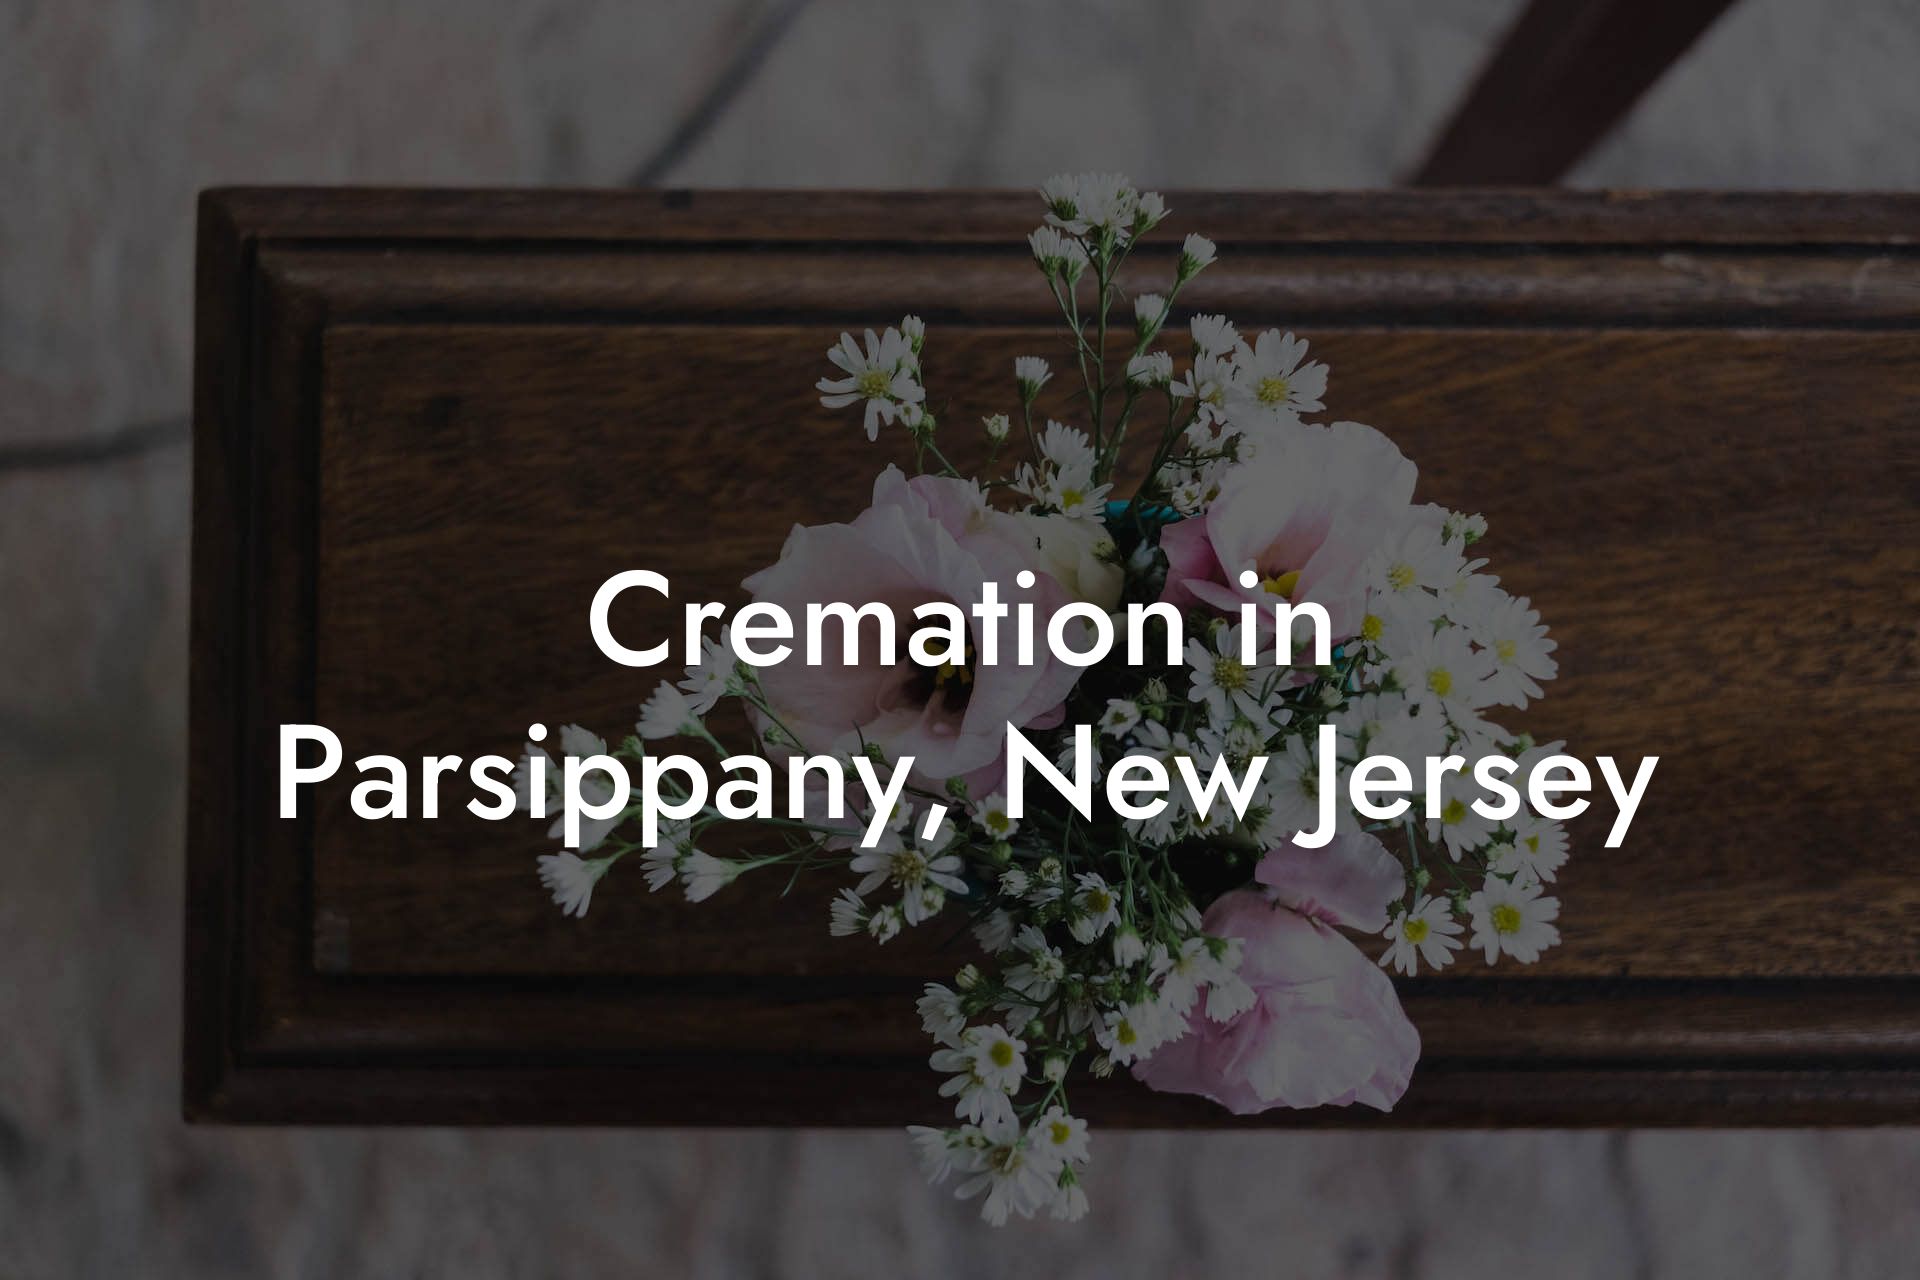 Cremation in Parsippany, New Jersey